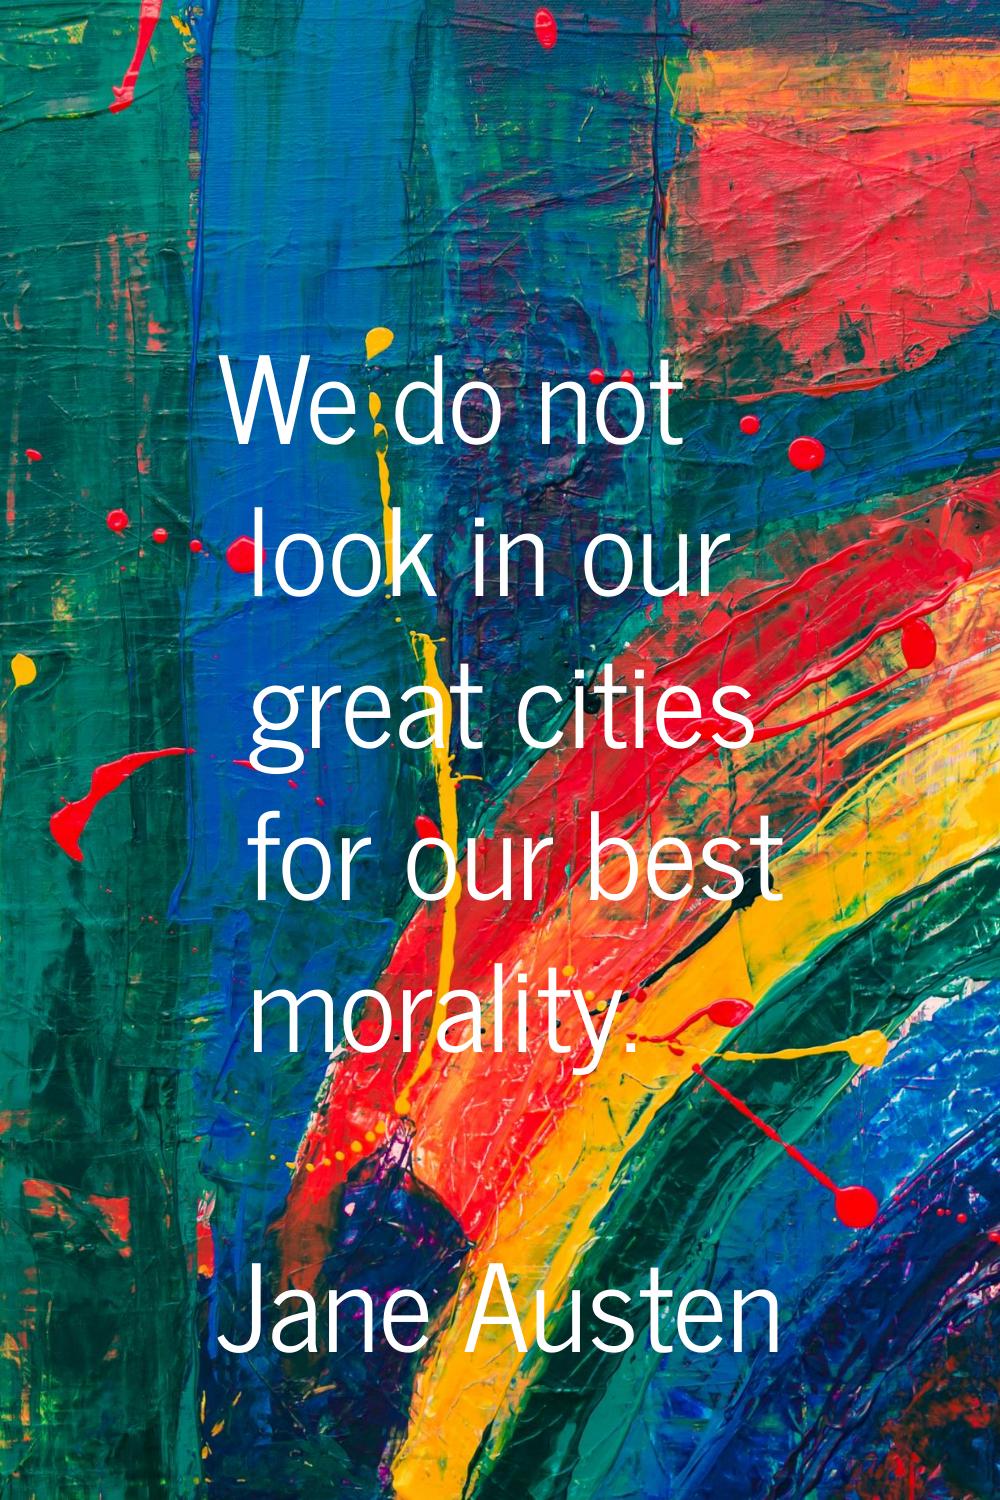 We do not look in our great cities for our best morality.